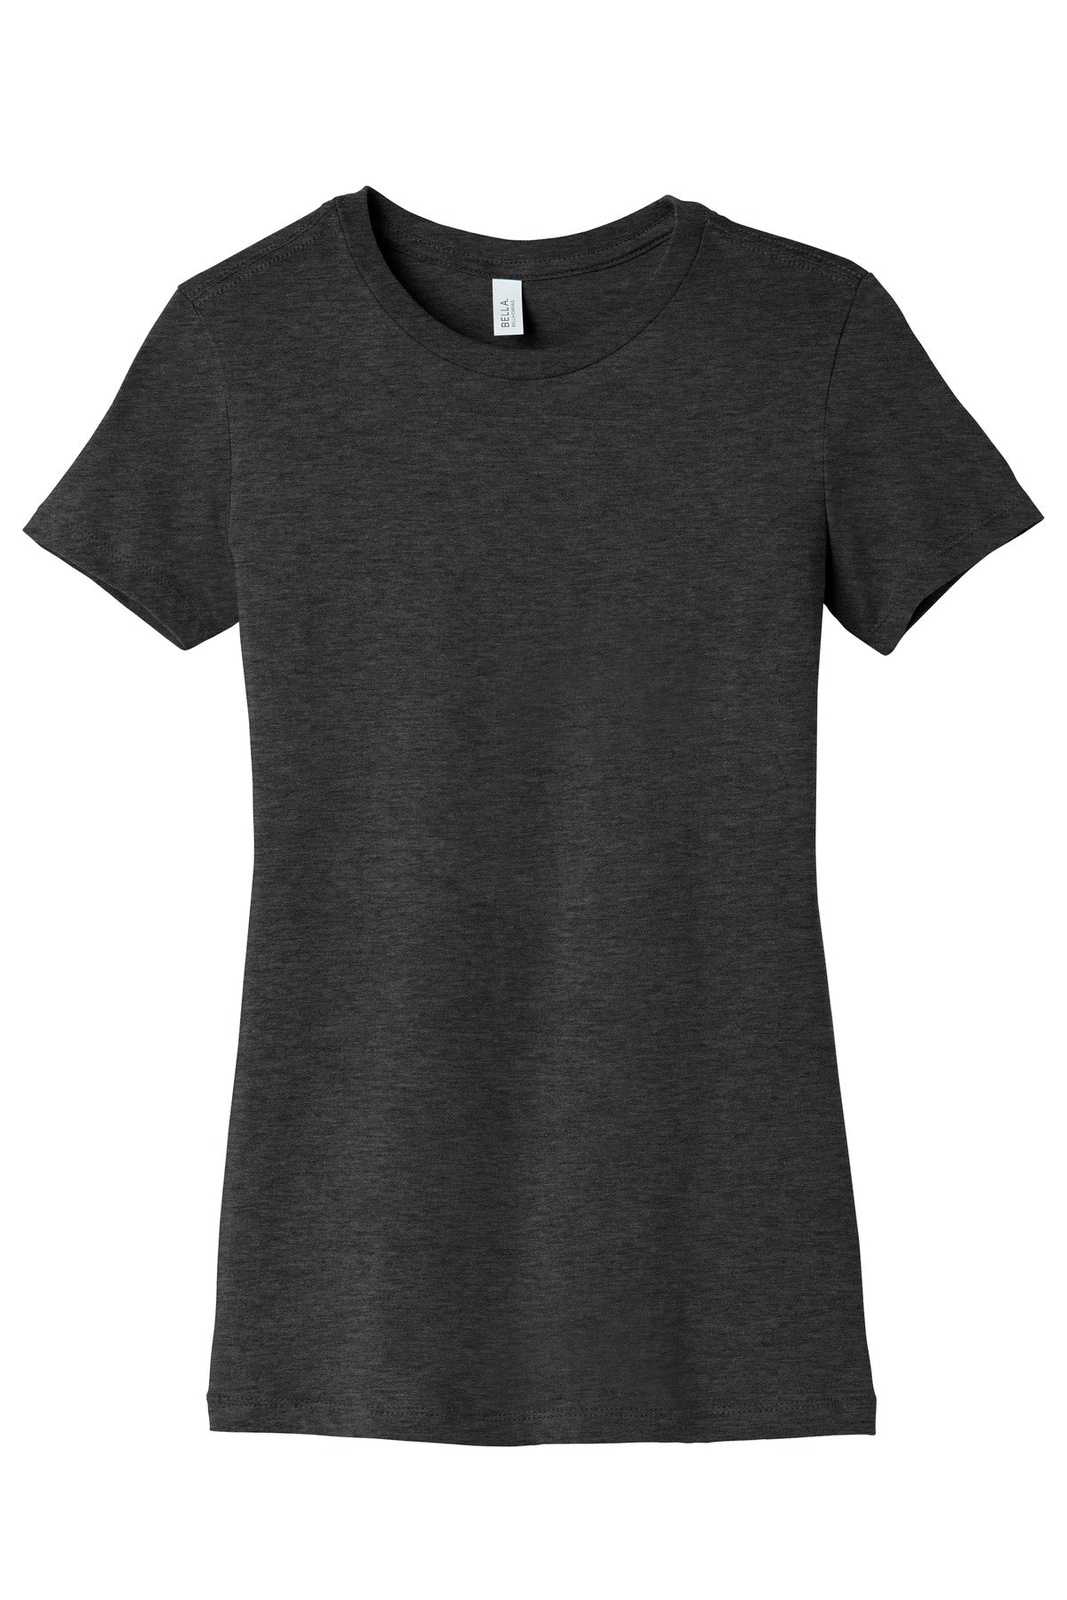 Bella + Canvas 6004 Women's The Favorite Tee - Black Heather - HIT a Double